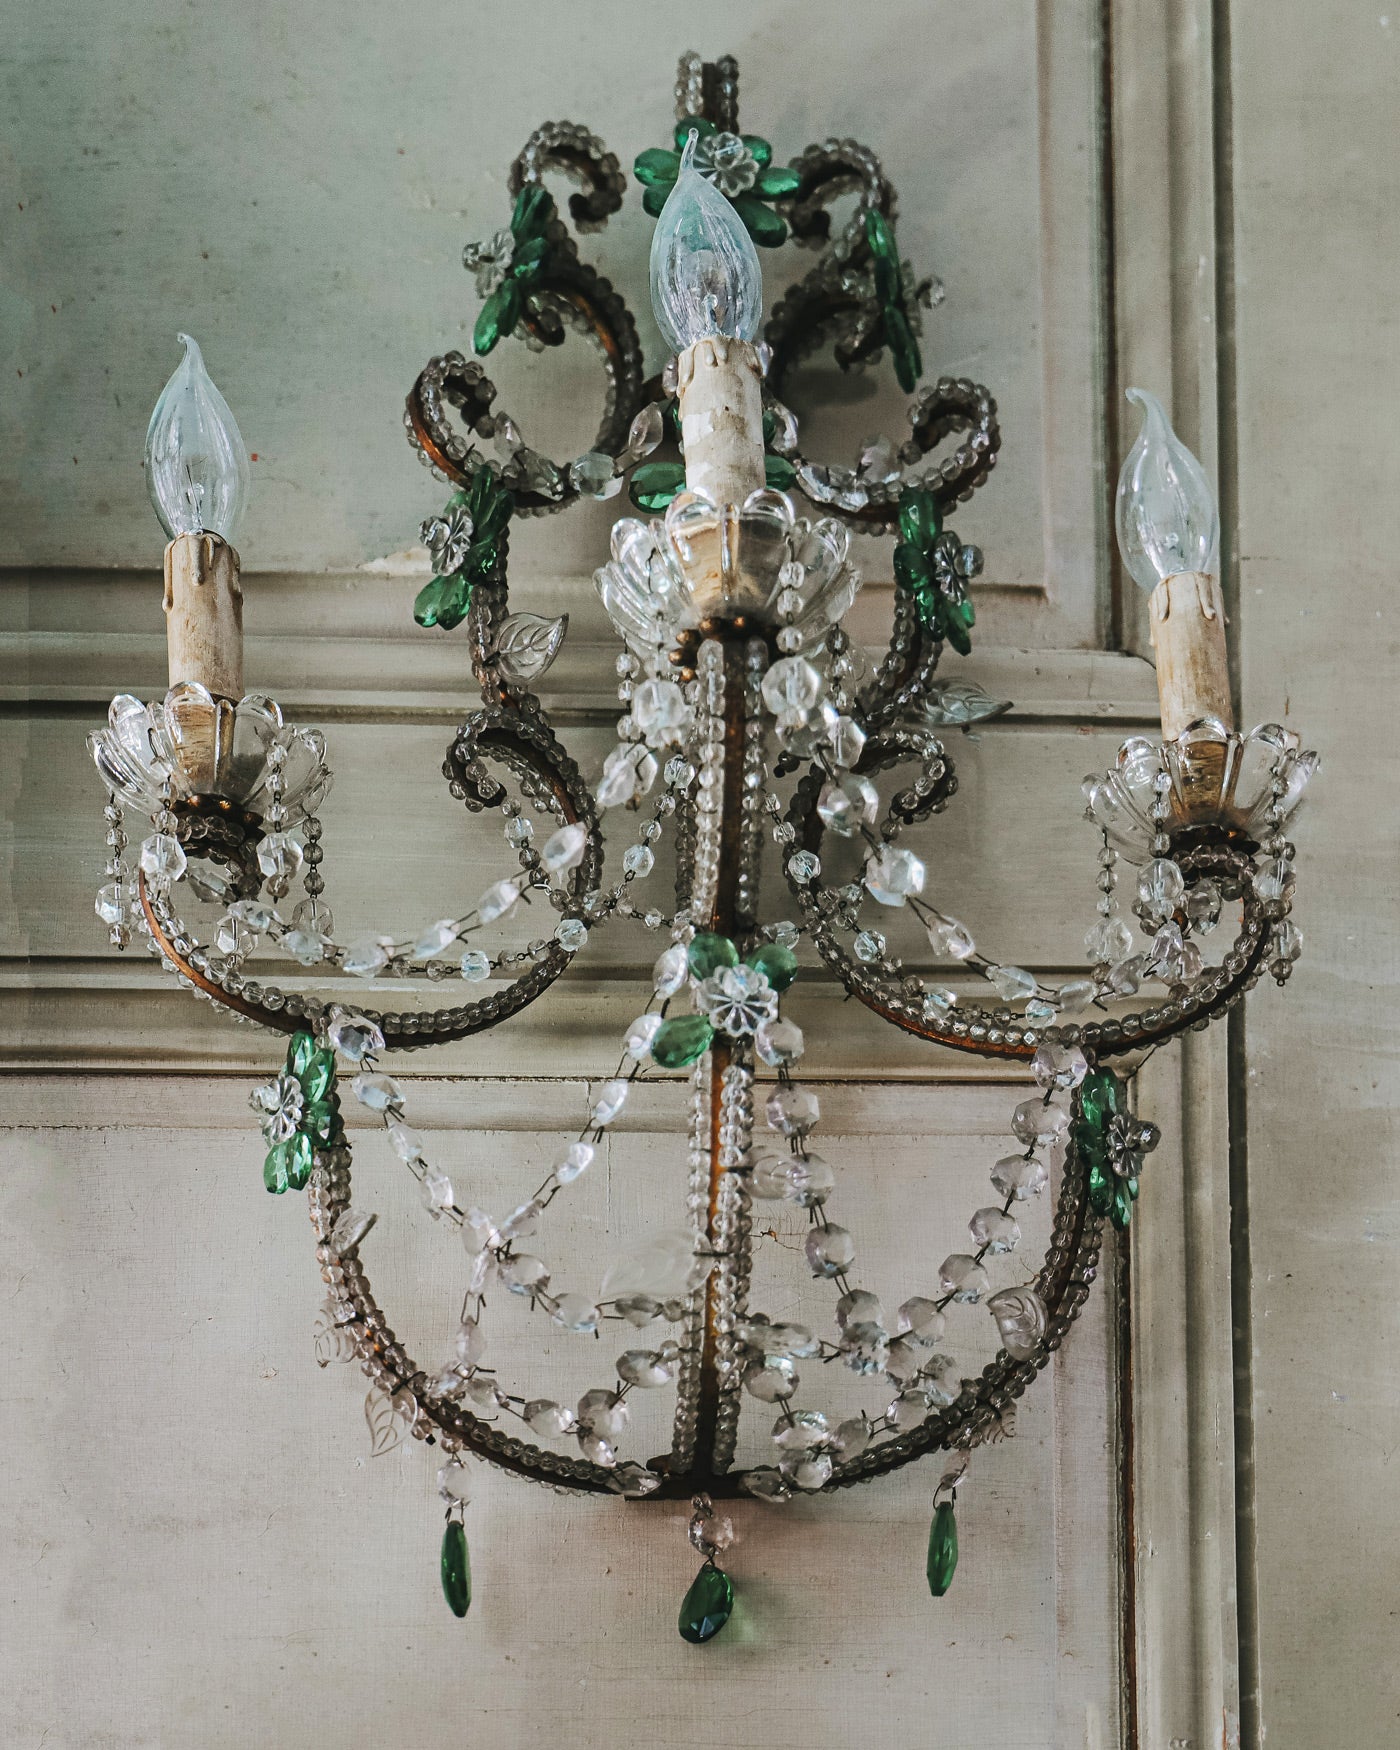 Set of Two Italian Crystal Beaded Applique Fixtures or Sconces with Green Flowers